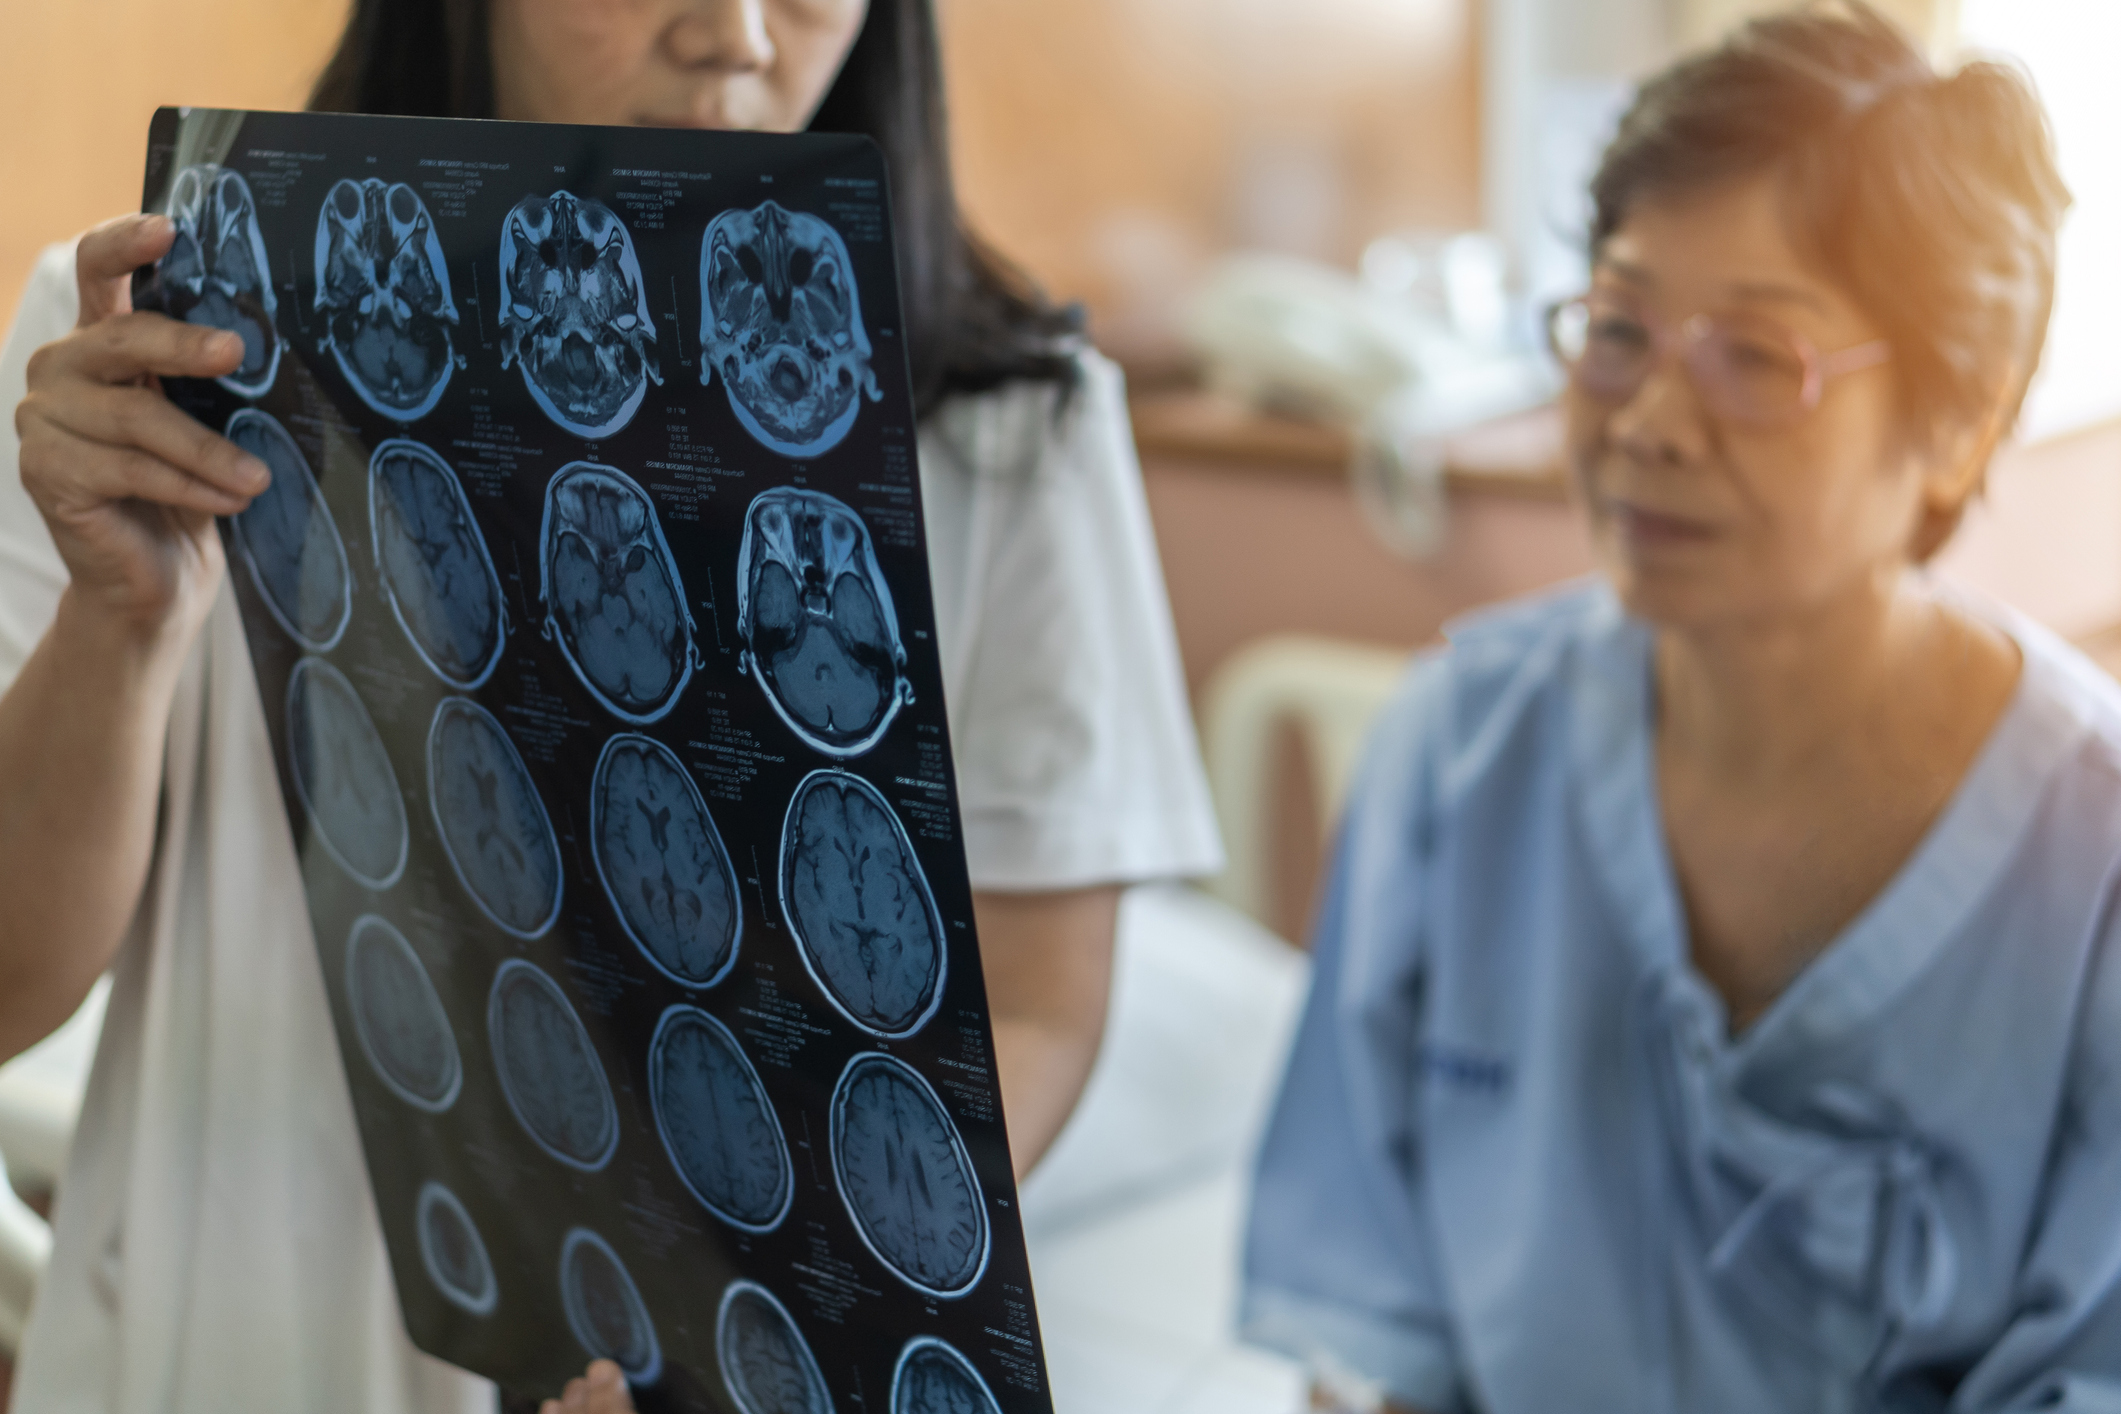 A female white doctor with long black hair holds up the results of a brain scan to an older Asian woman who sits in a hospital bed wearing glasses and a blue hospital gown